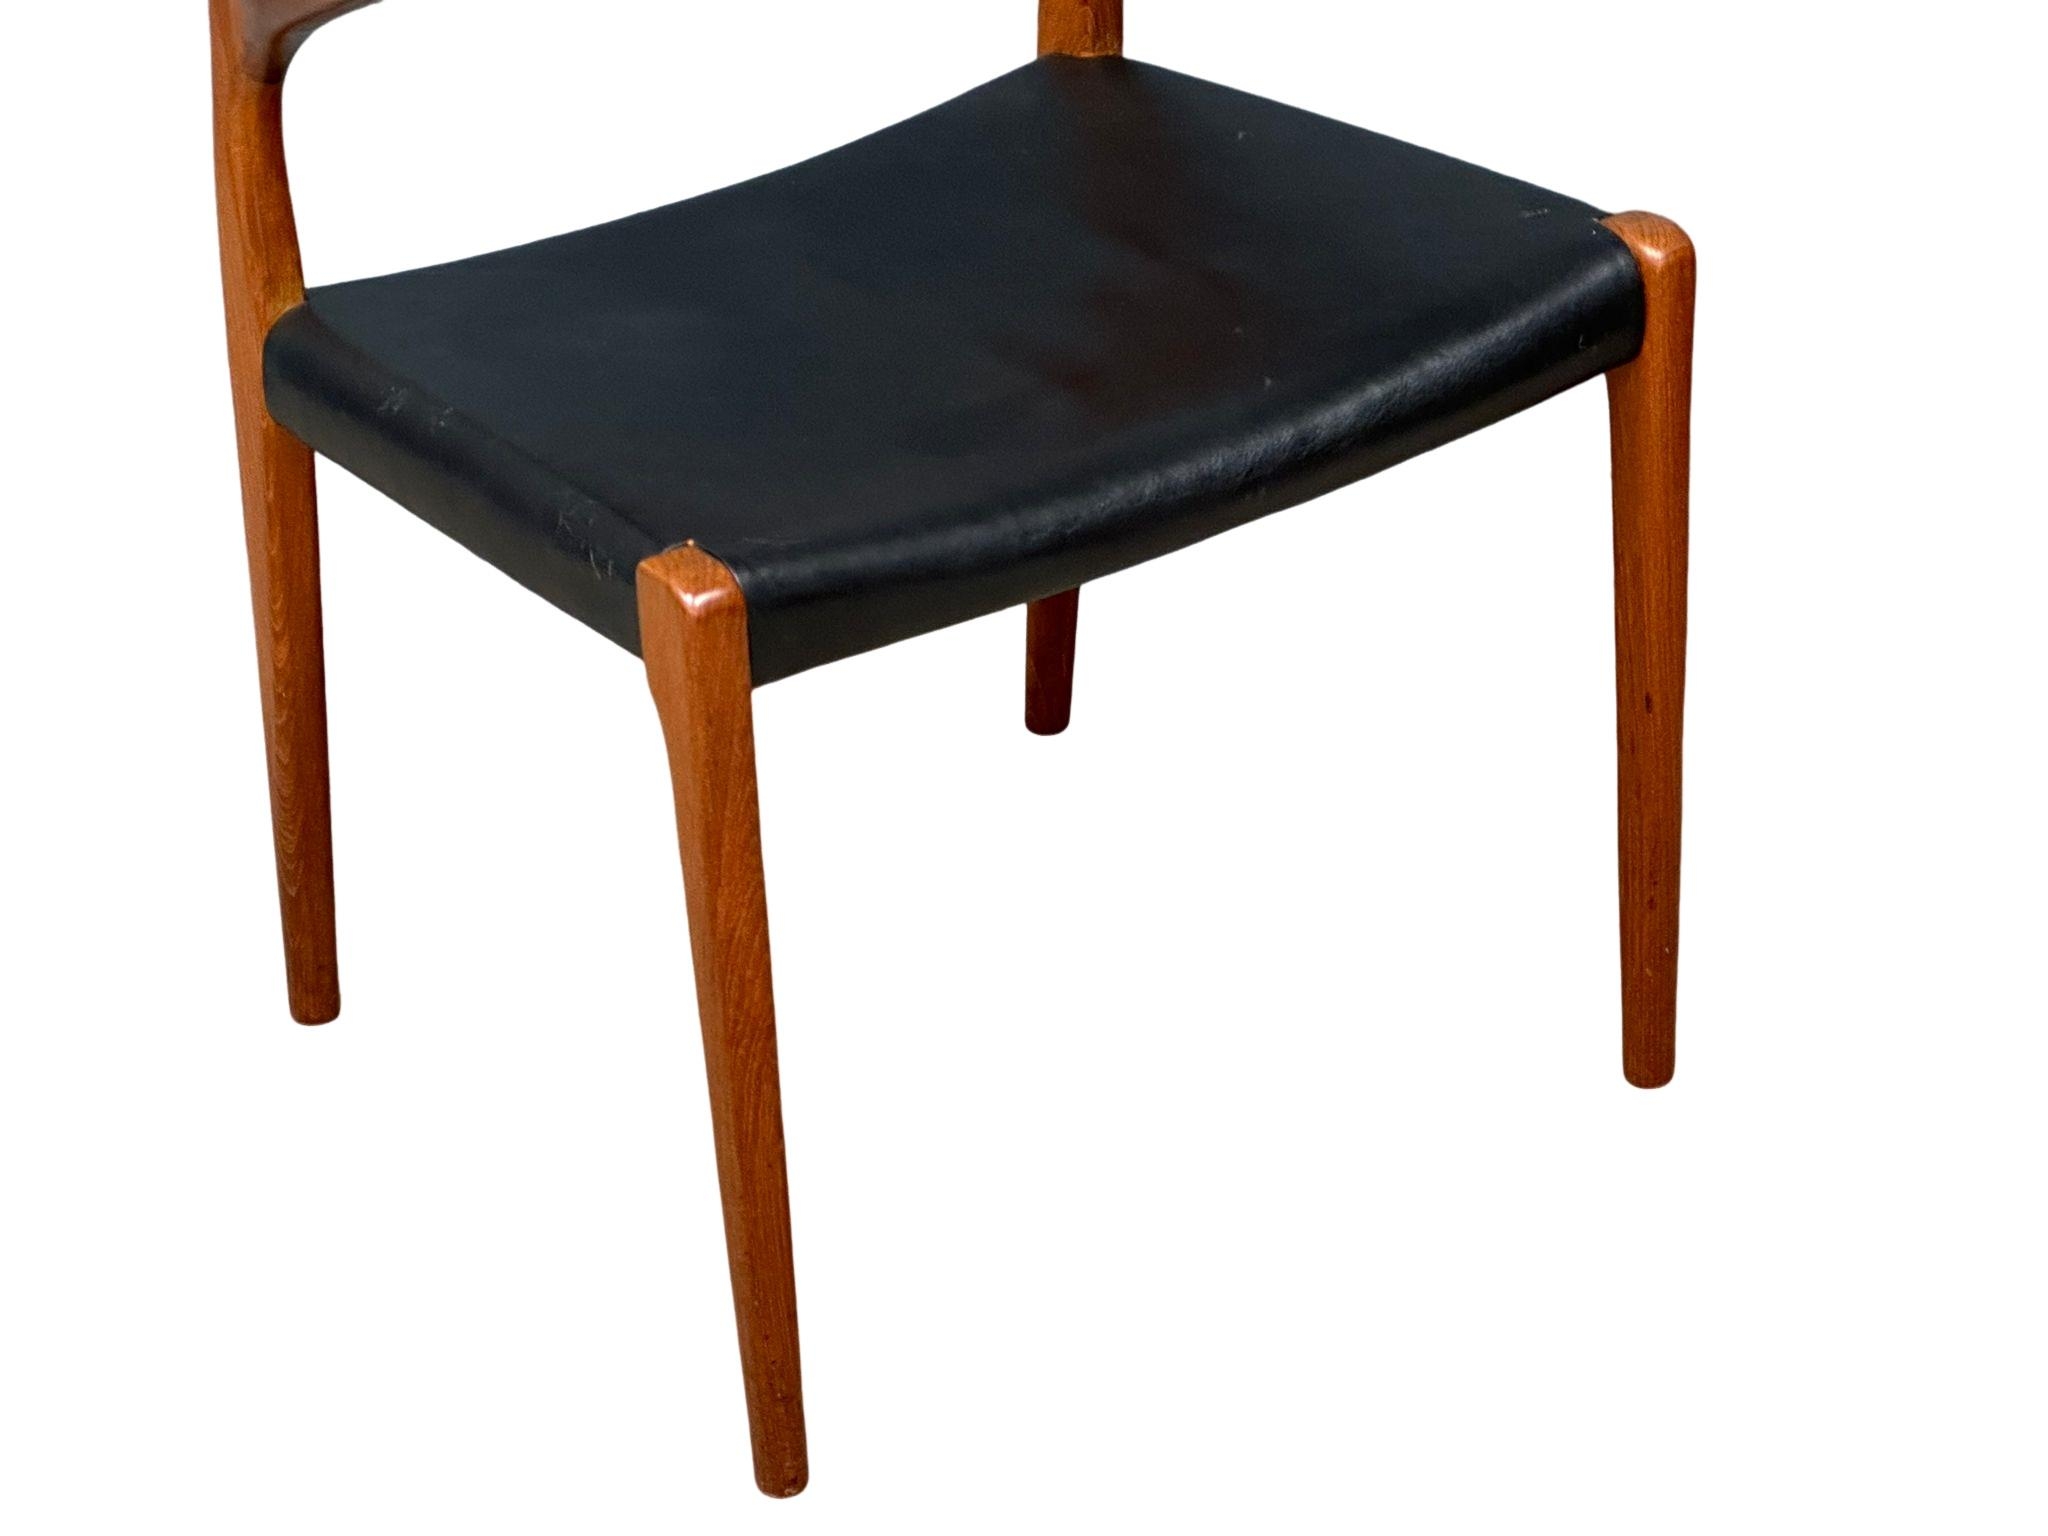 A set of 6 rare Danish Mid Century teak carver chairs designed by Niels Otto Moller for J.L. Moller. - Image 11 of 20